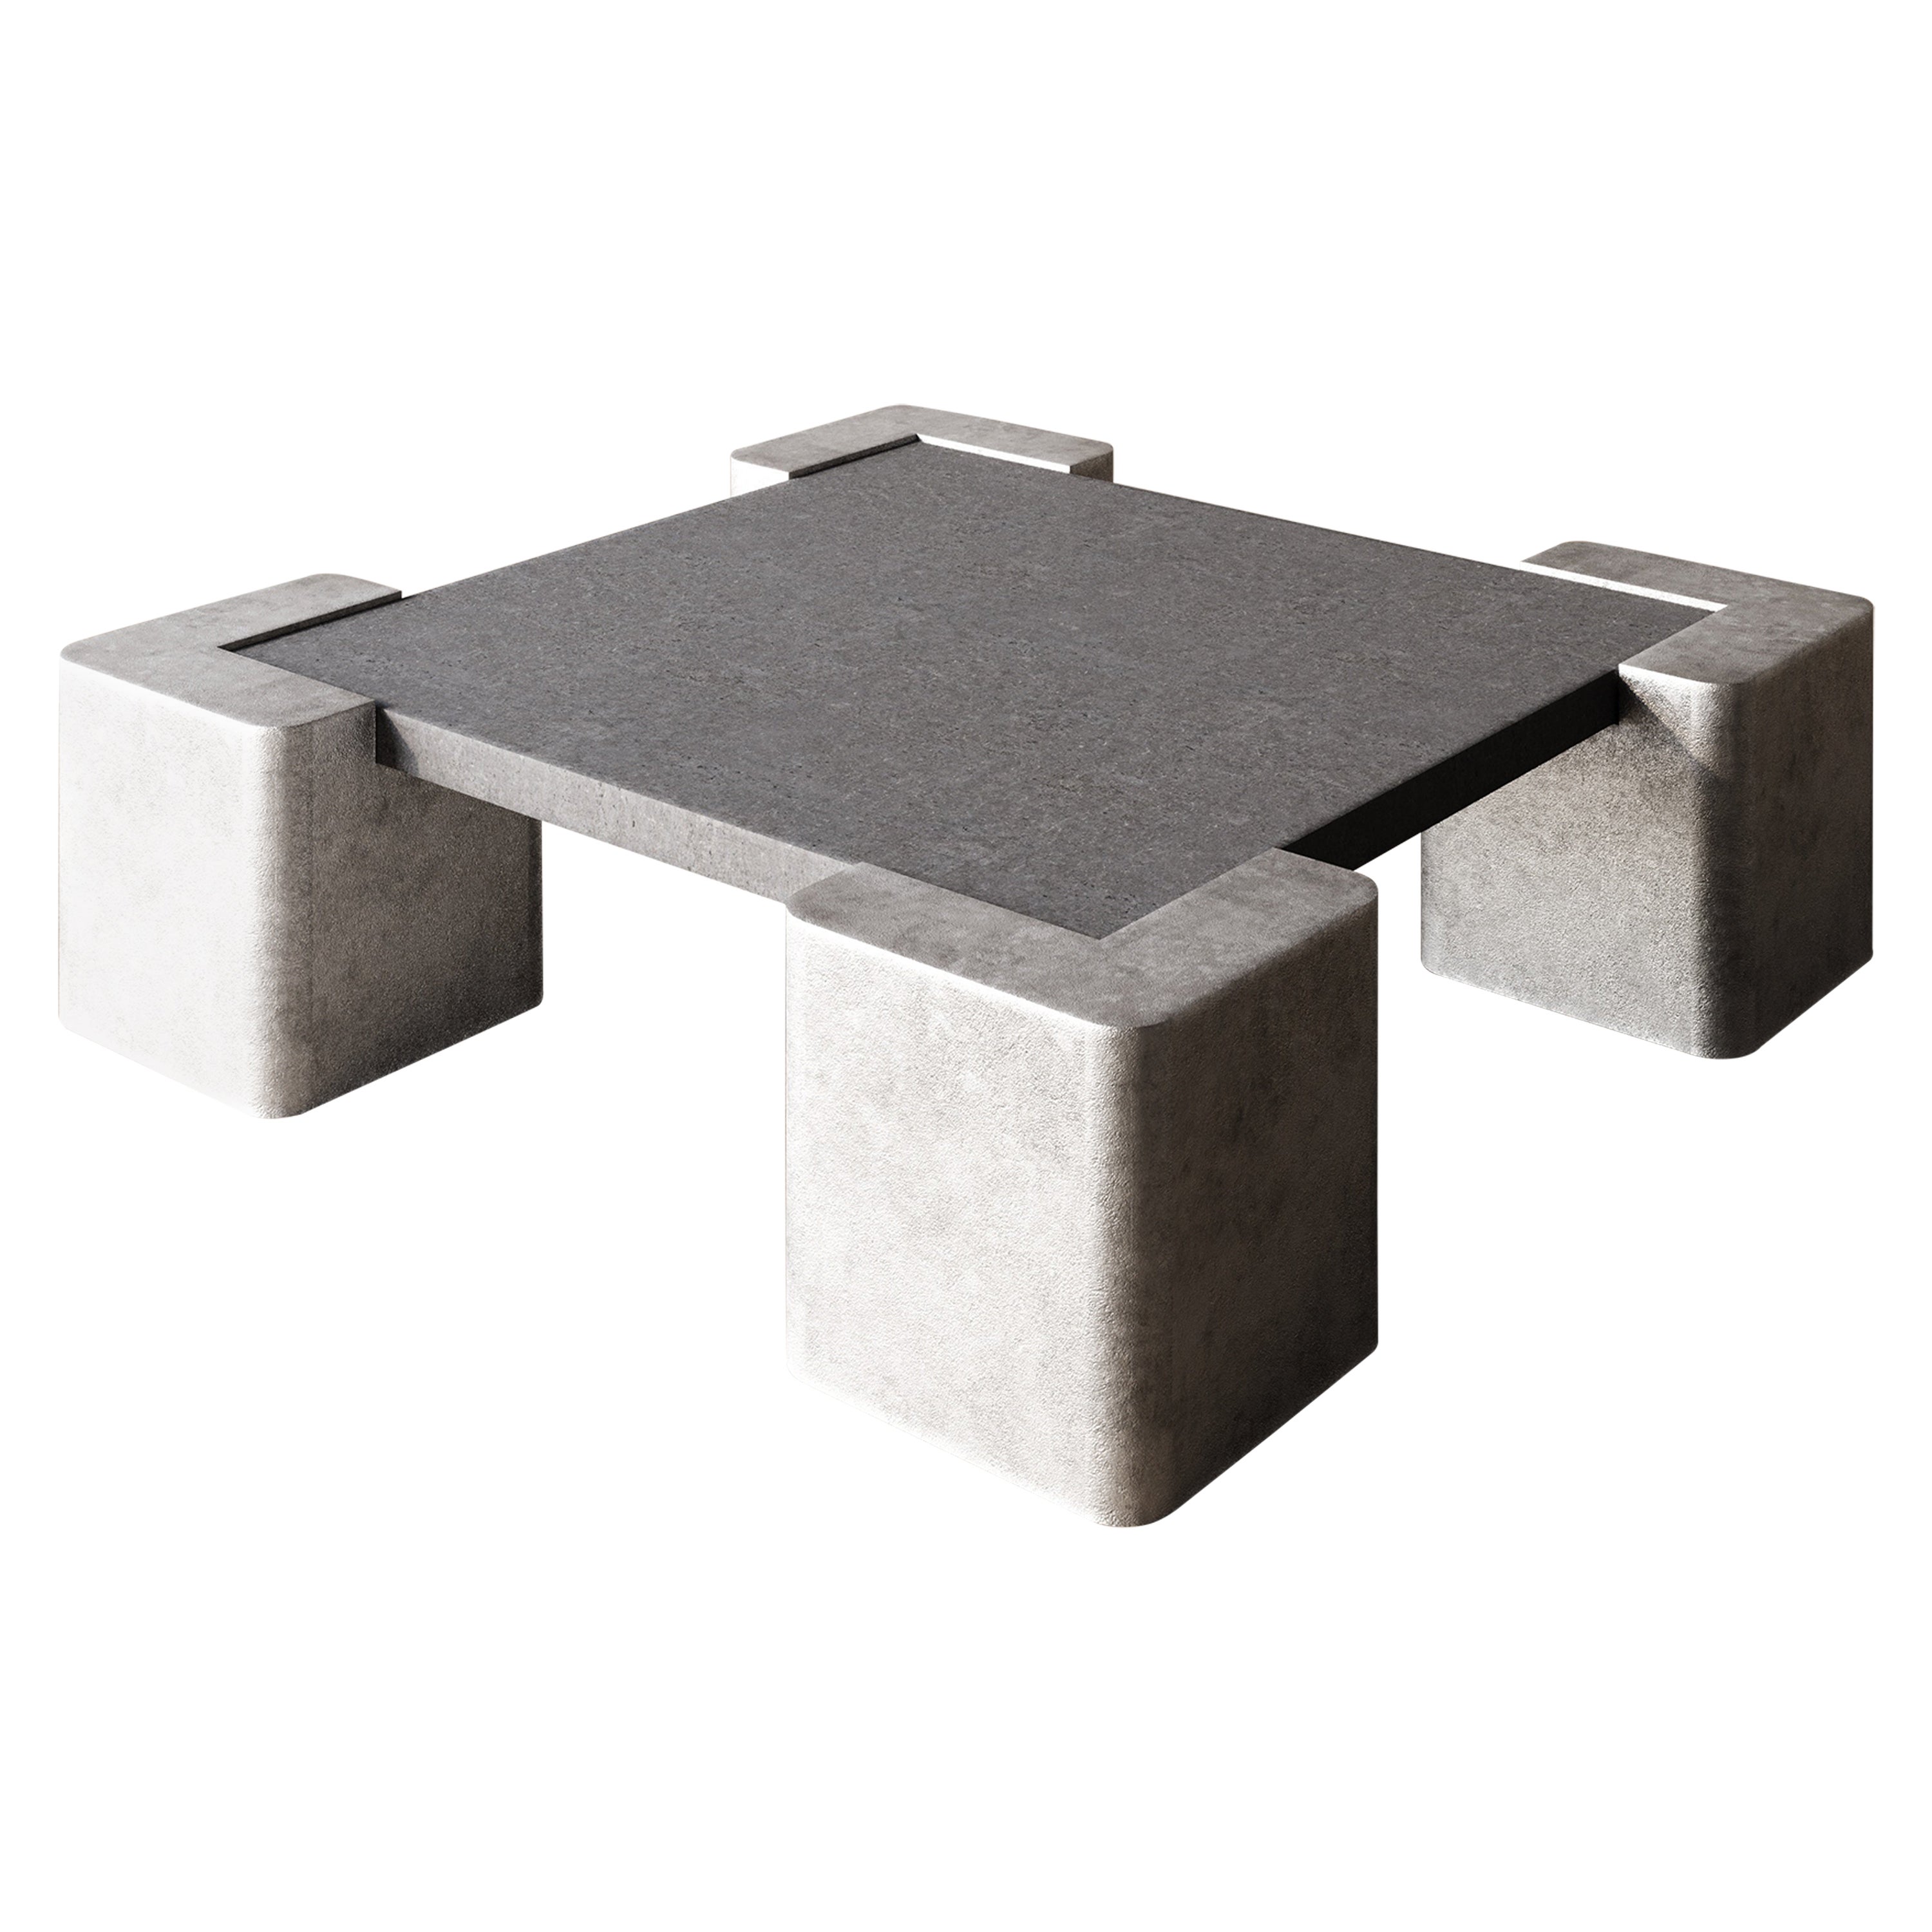 Nº 202 Sand-Cast Aluminum + Volcanic Stone Low Table by Amee Allsop Studio For Sale